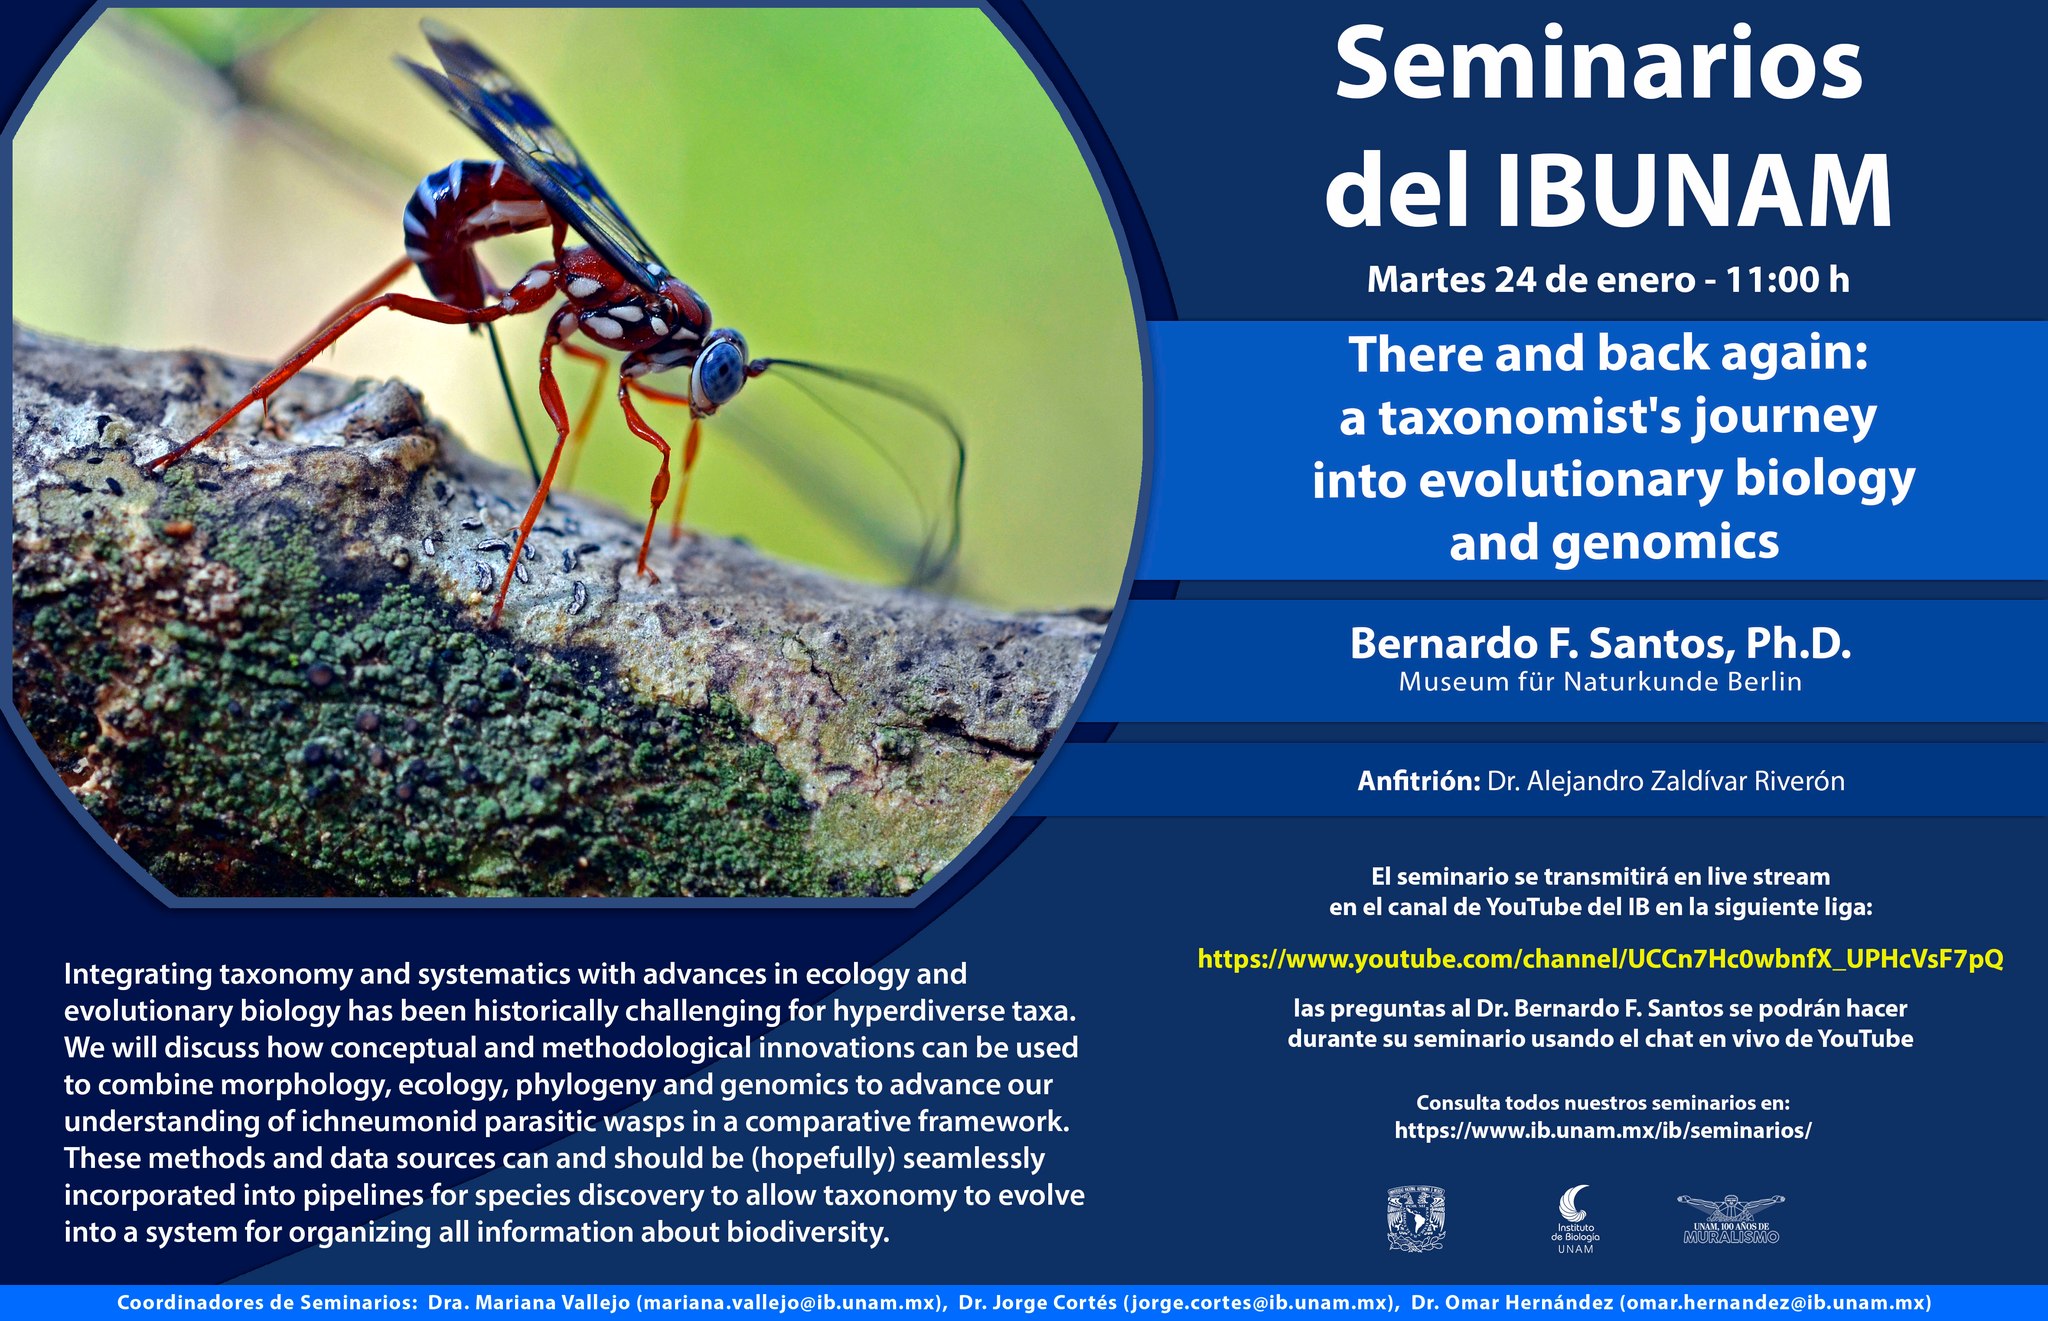 There and back again: a taxonomist's journey into evolutionary biology and genomics - Instituto de Biología, UNAM